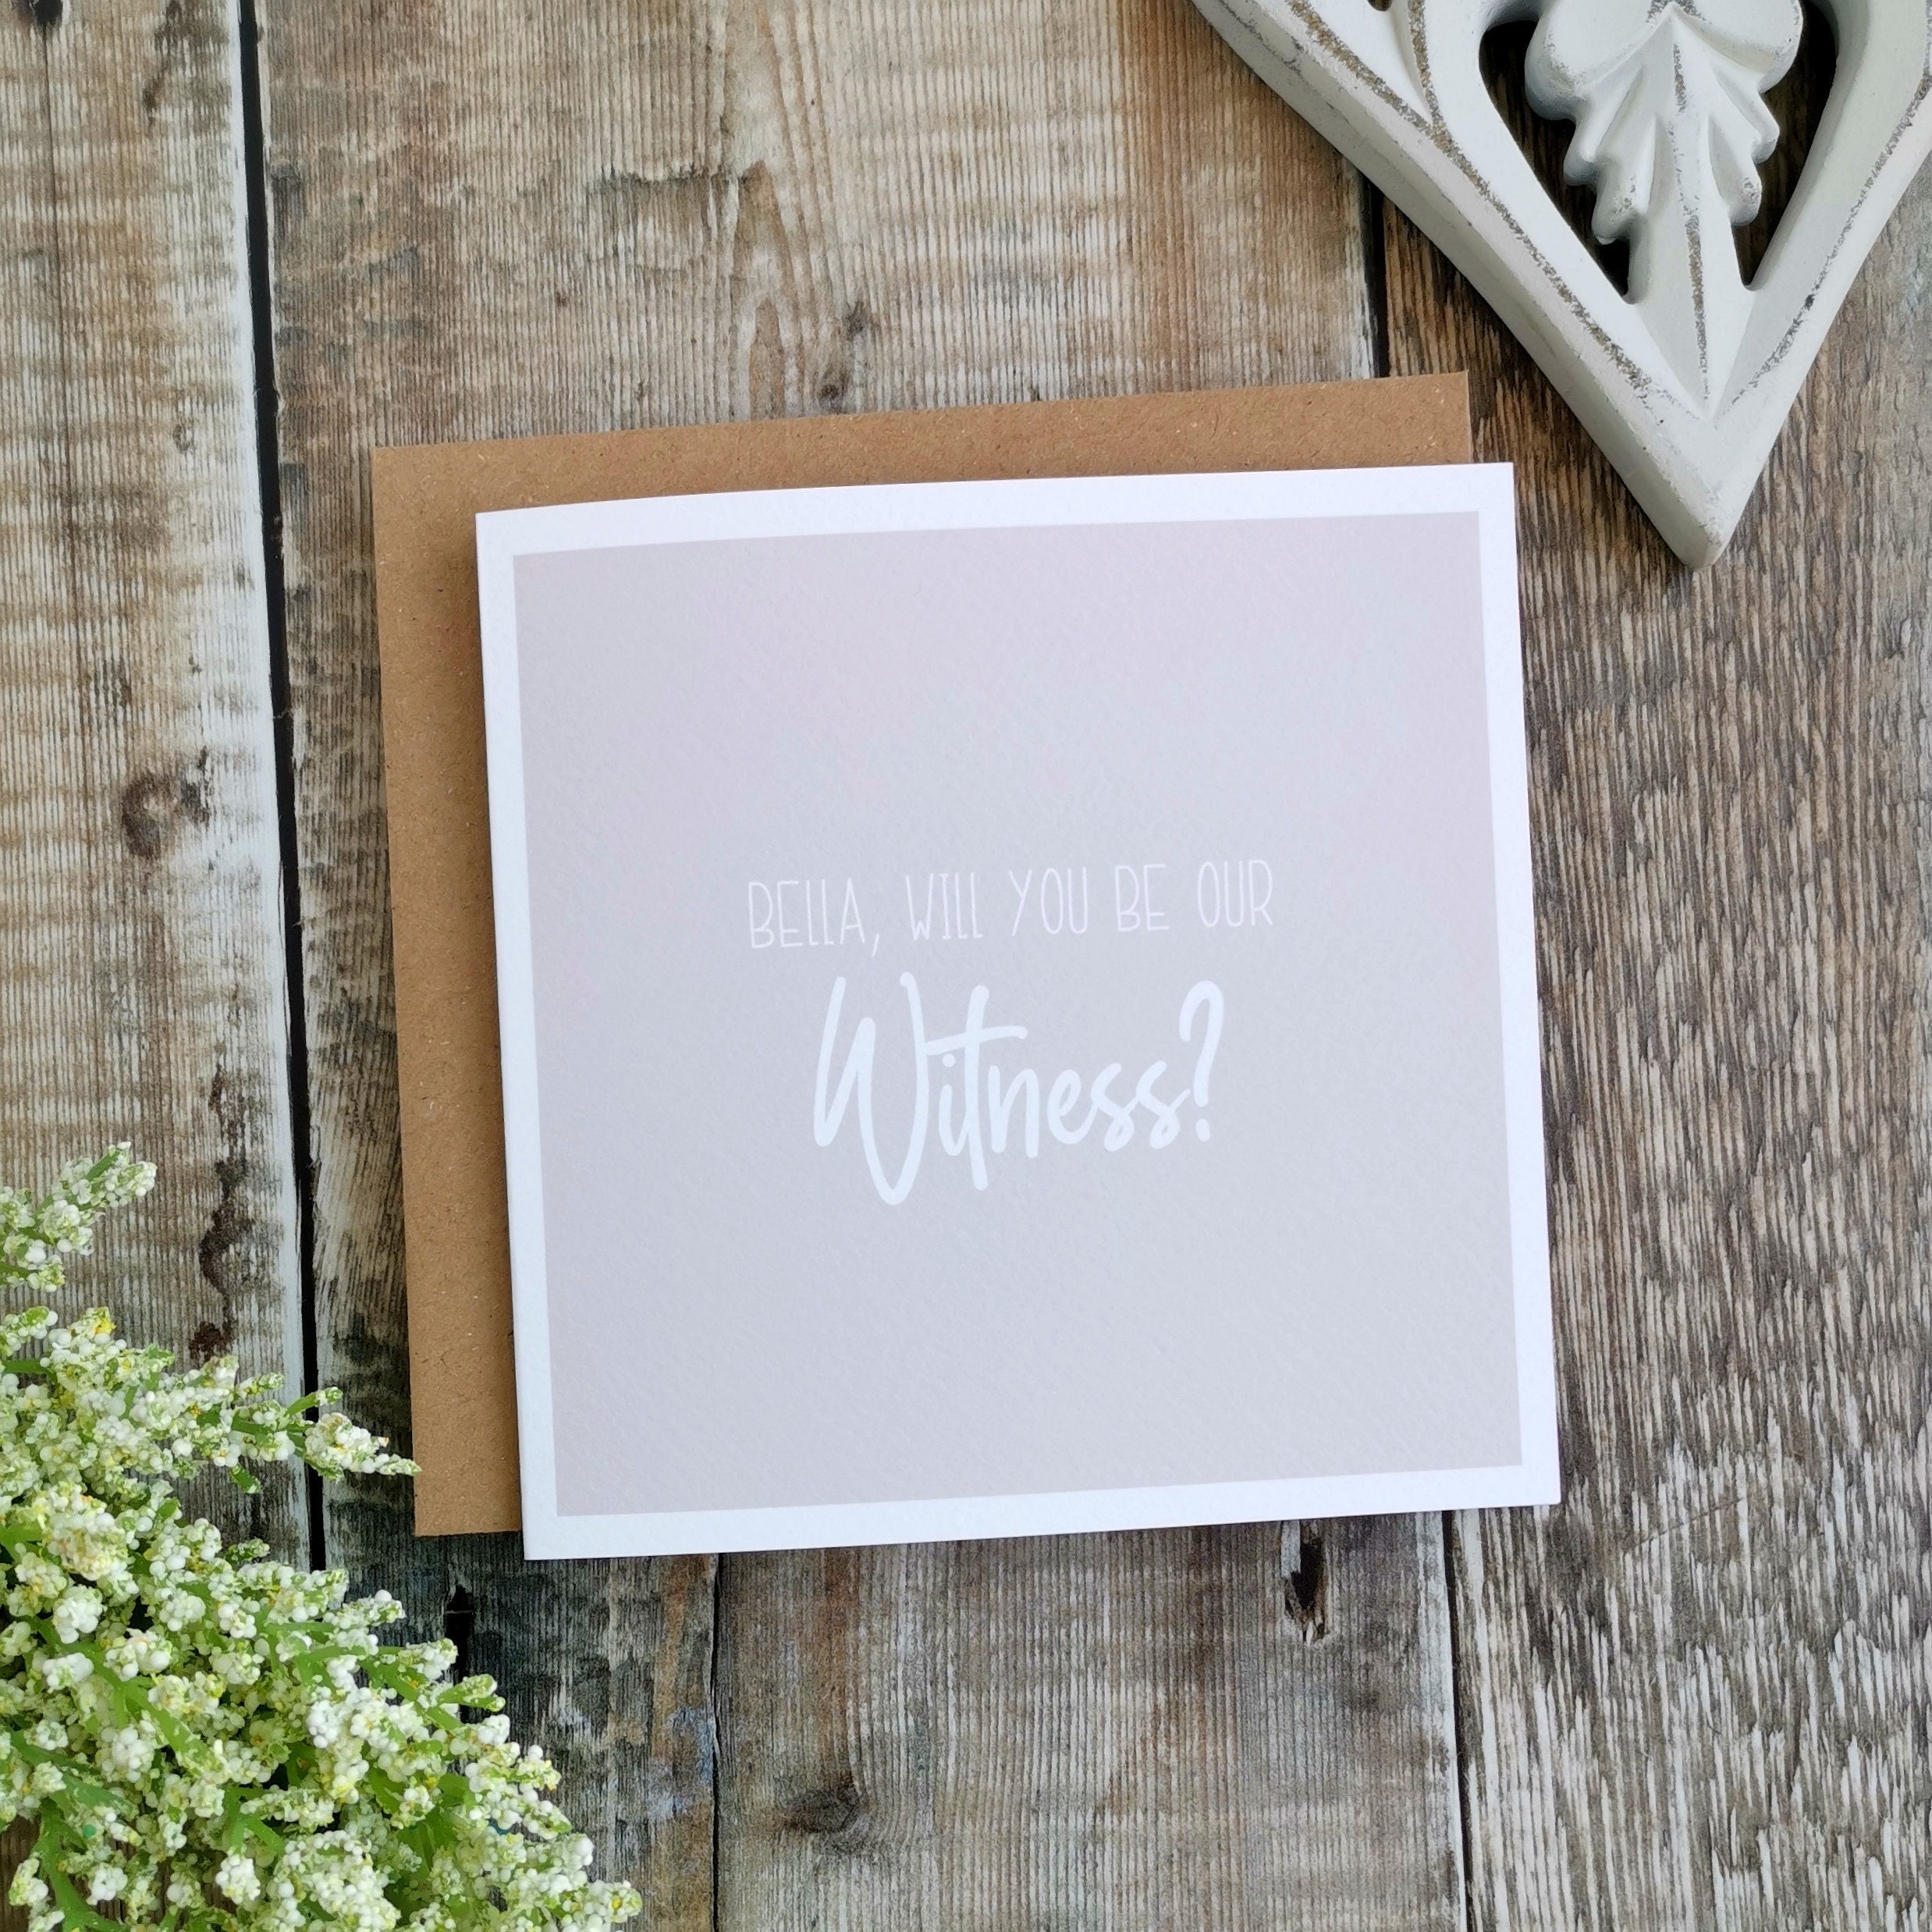 Personalised Will You Be Our Witness? Wedding Card. Beige-Grey, Neutral, Modern, Natural, Minimalist Wedding Card